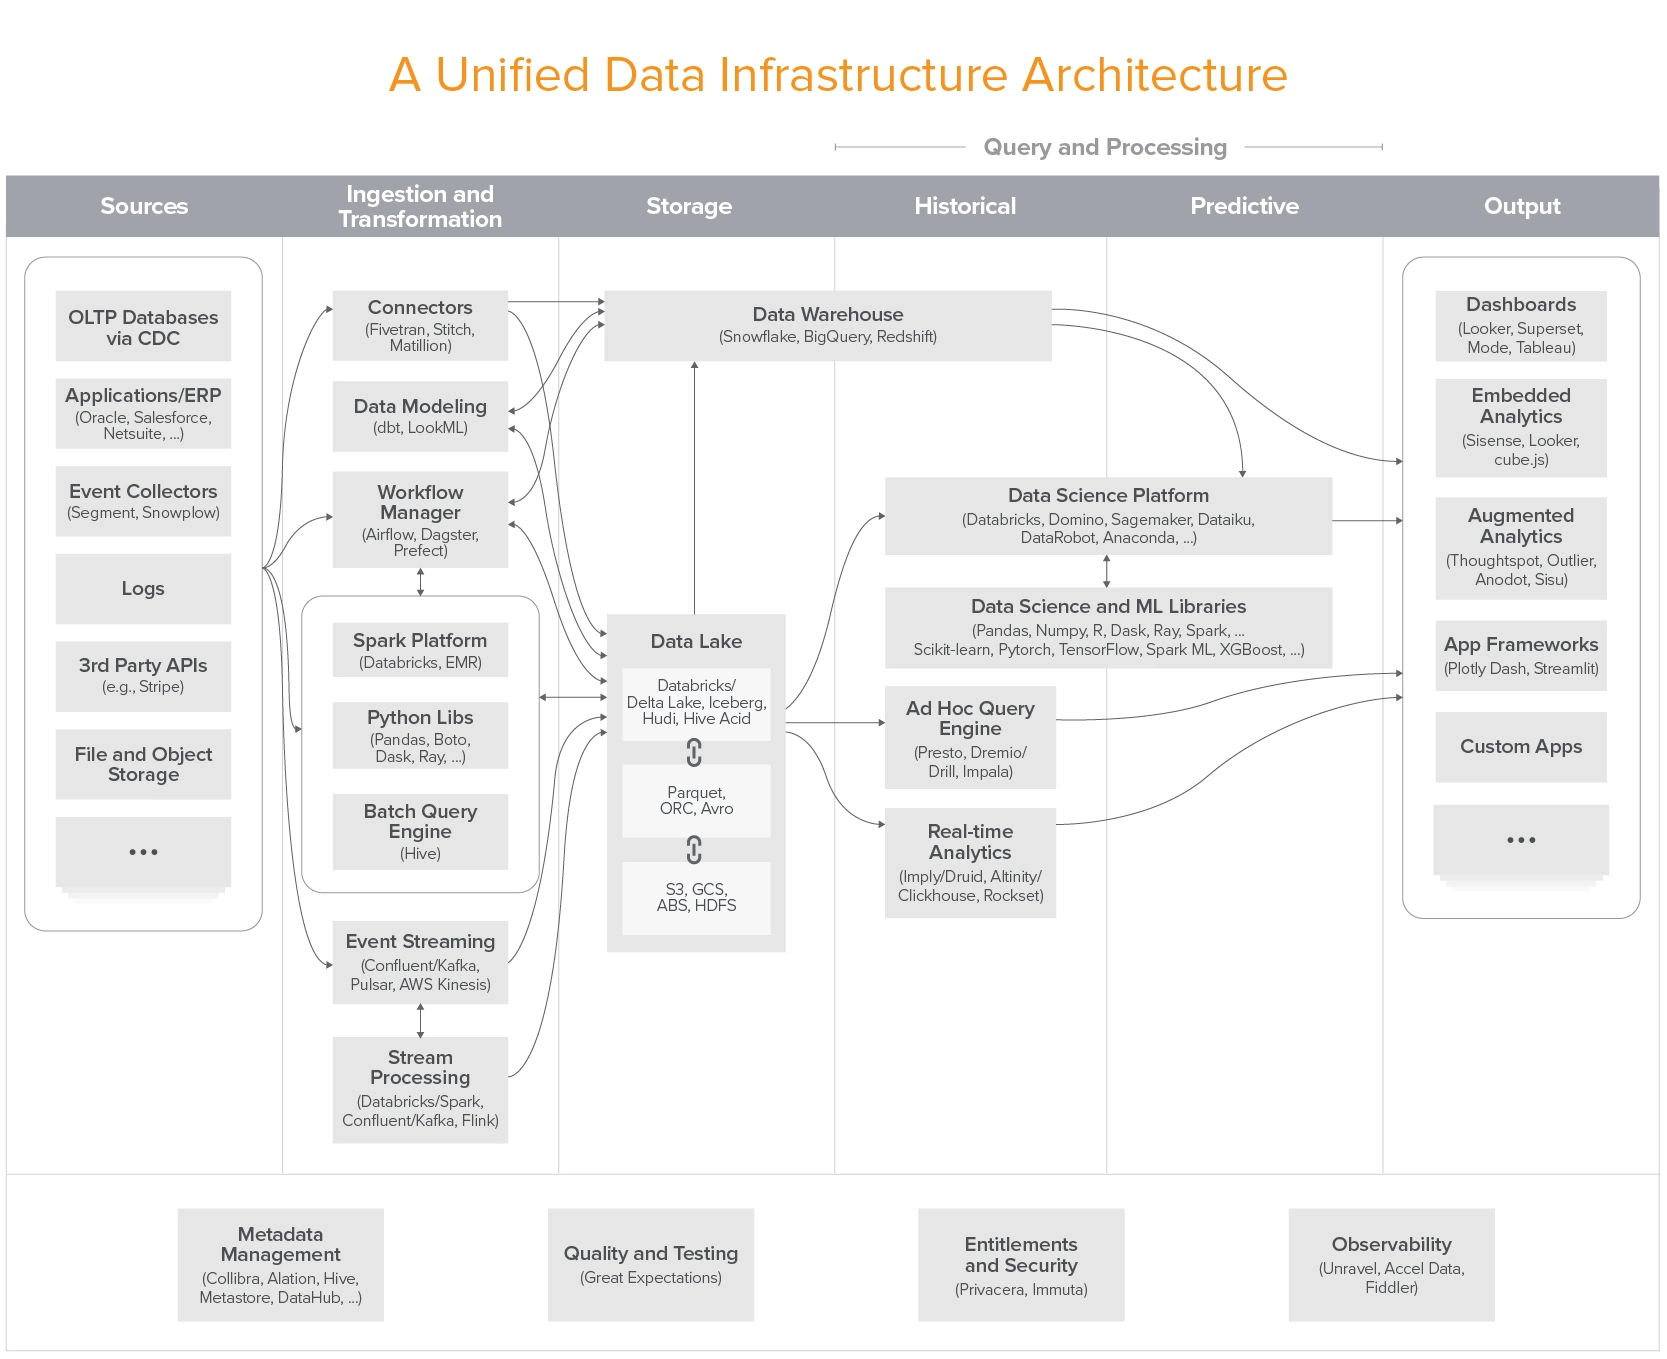 A unified data infrastructure architecture